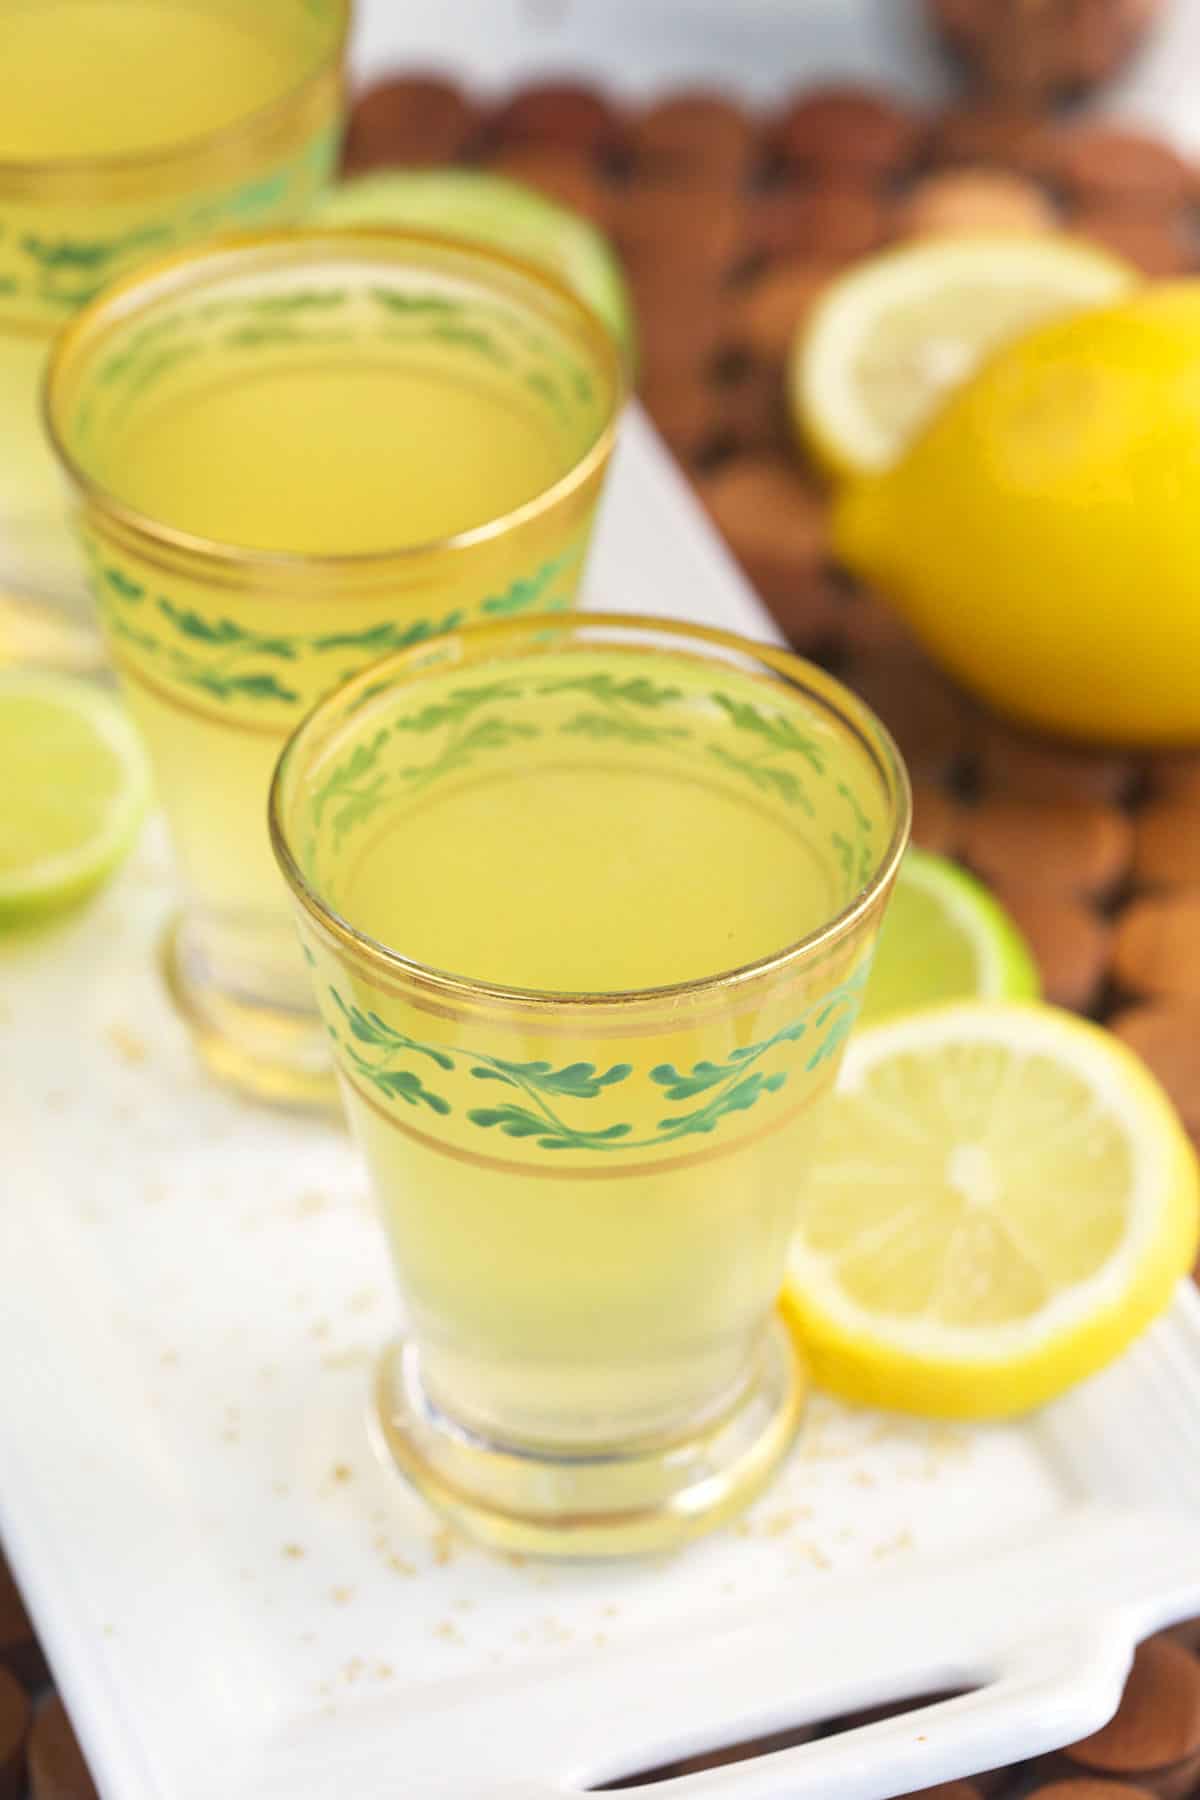 Lemon slices are placed all around several green tea shots. 